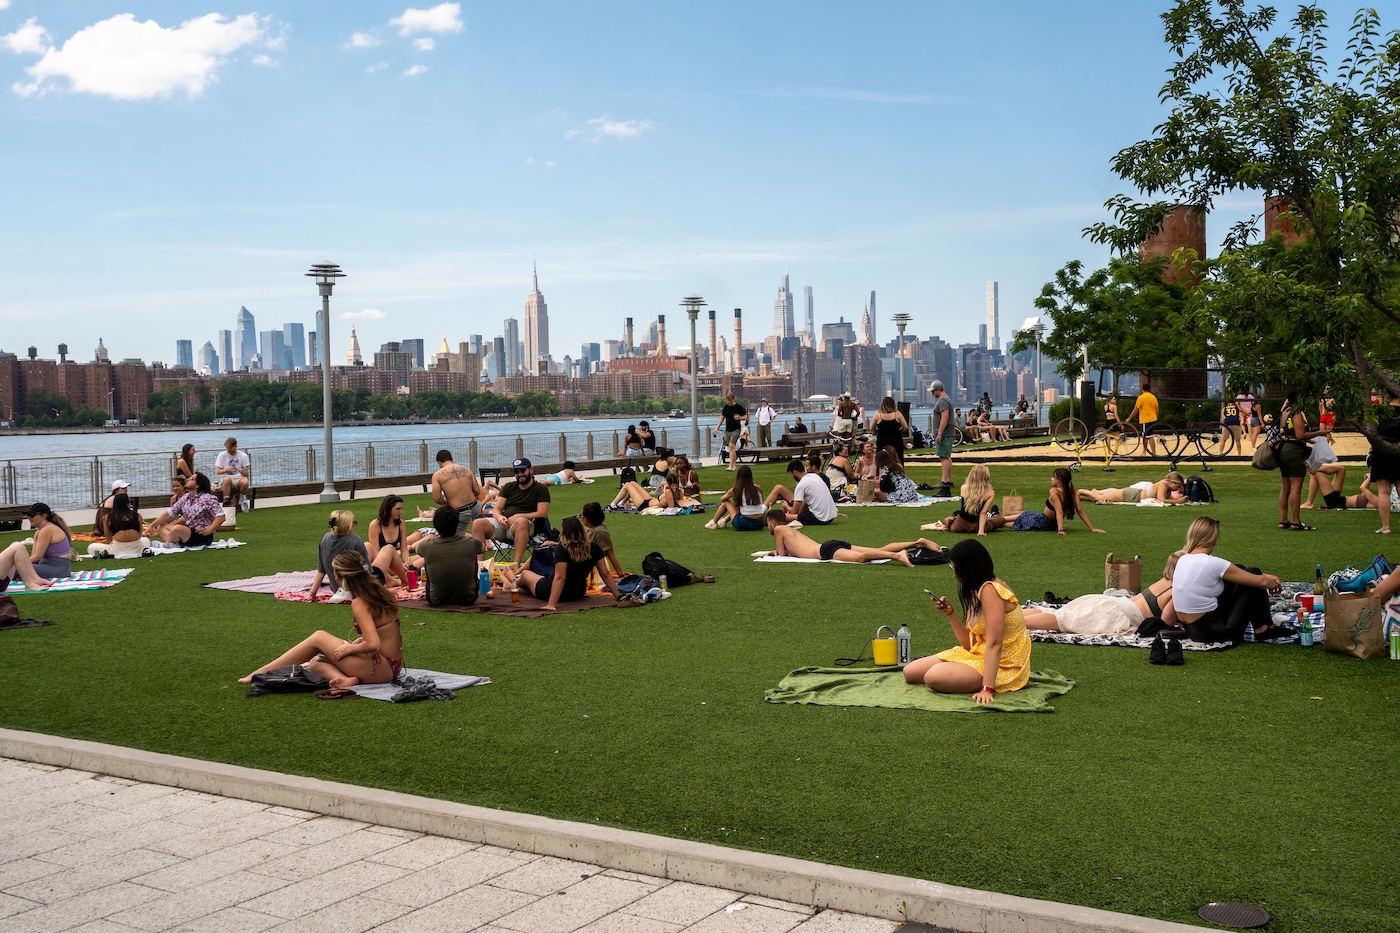 Park visitors to NYC bake in the sun